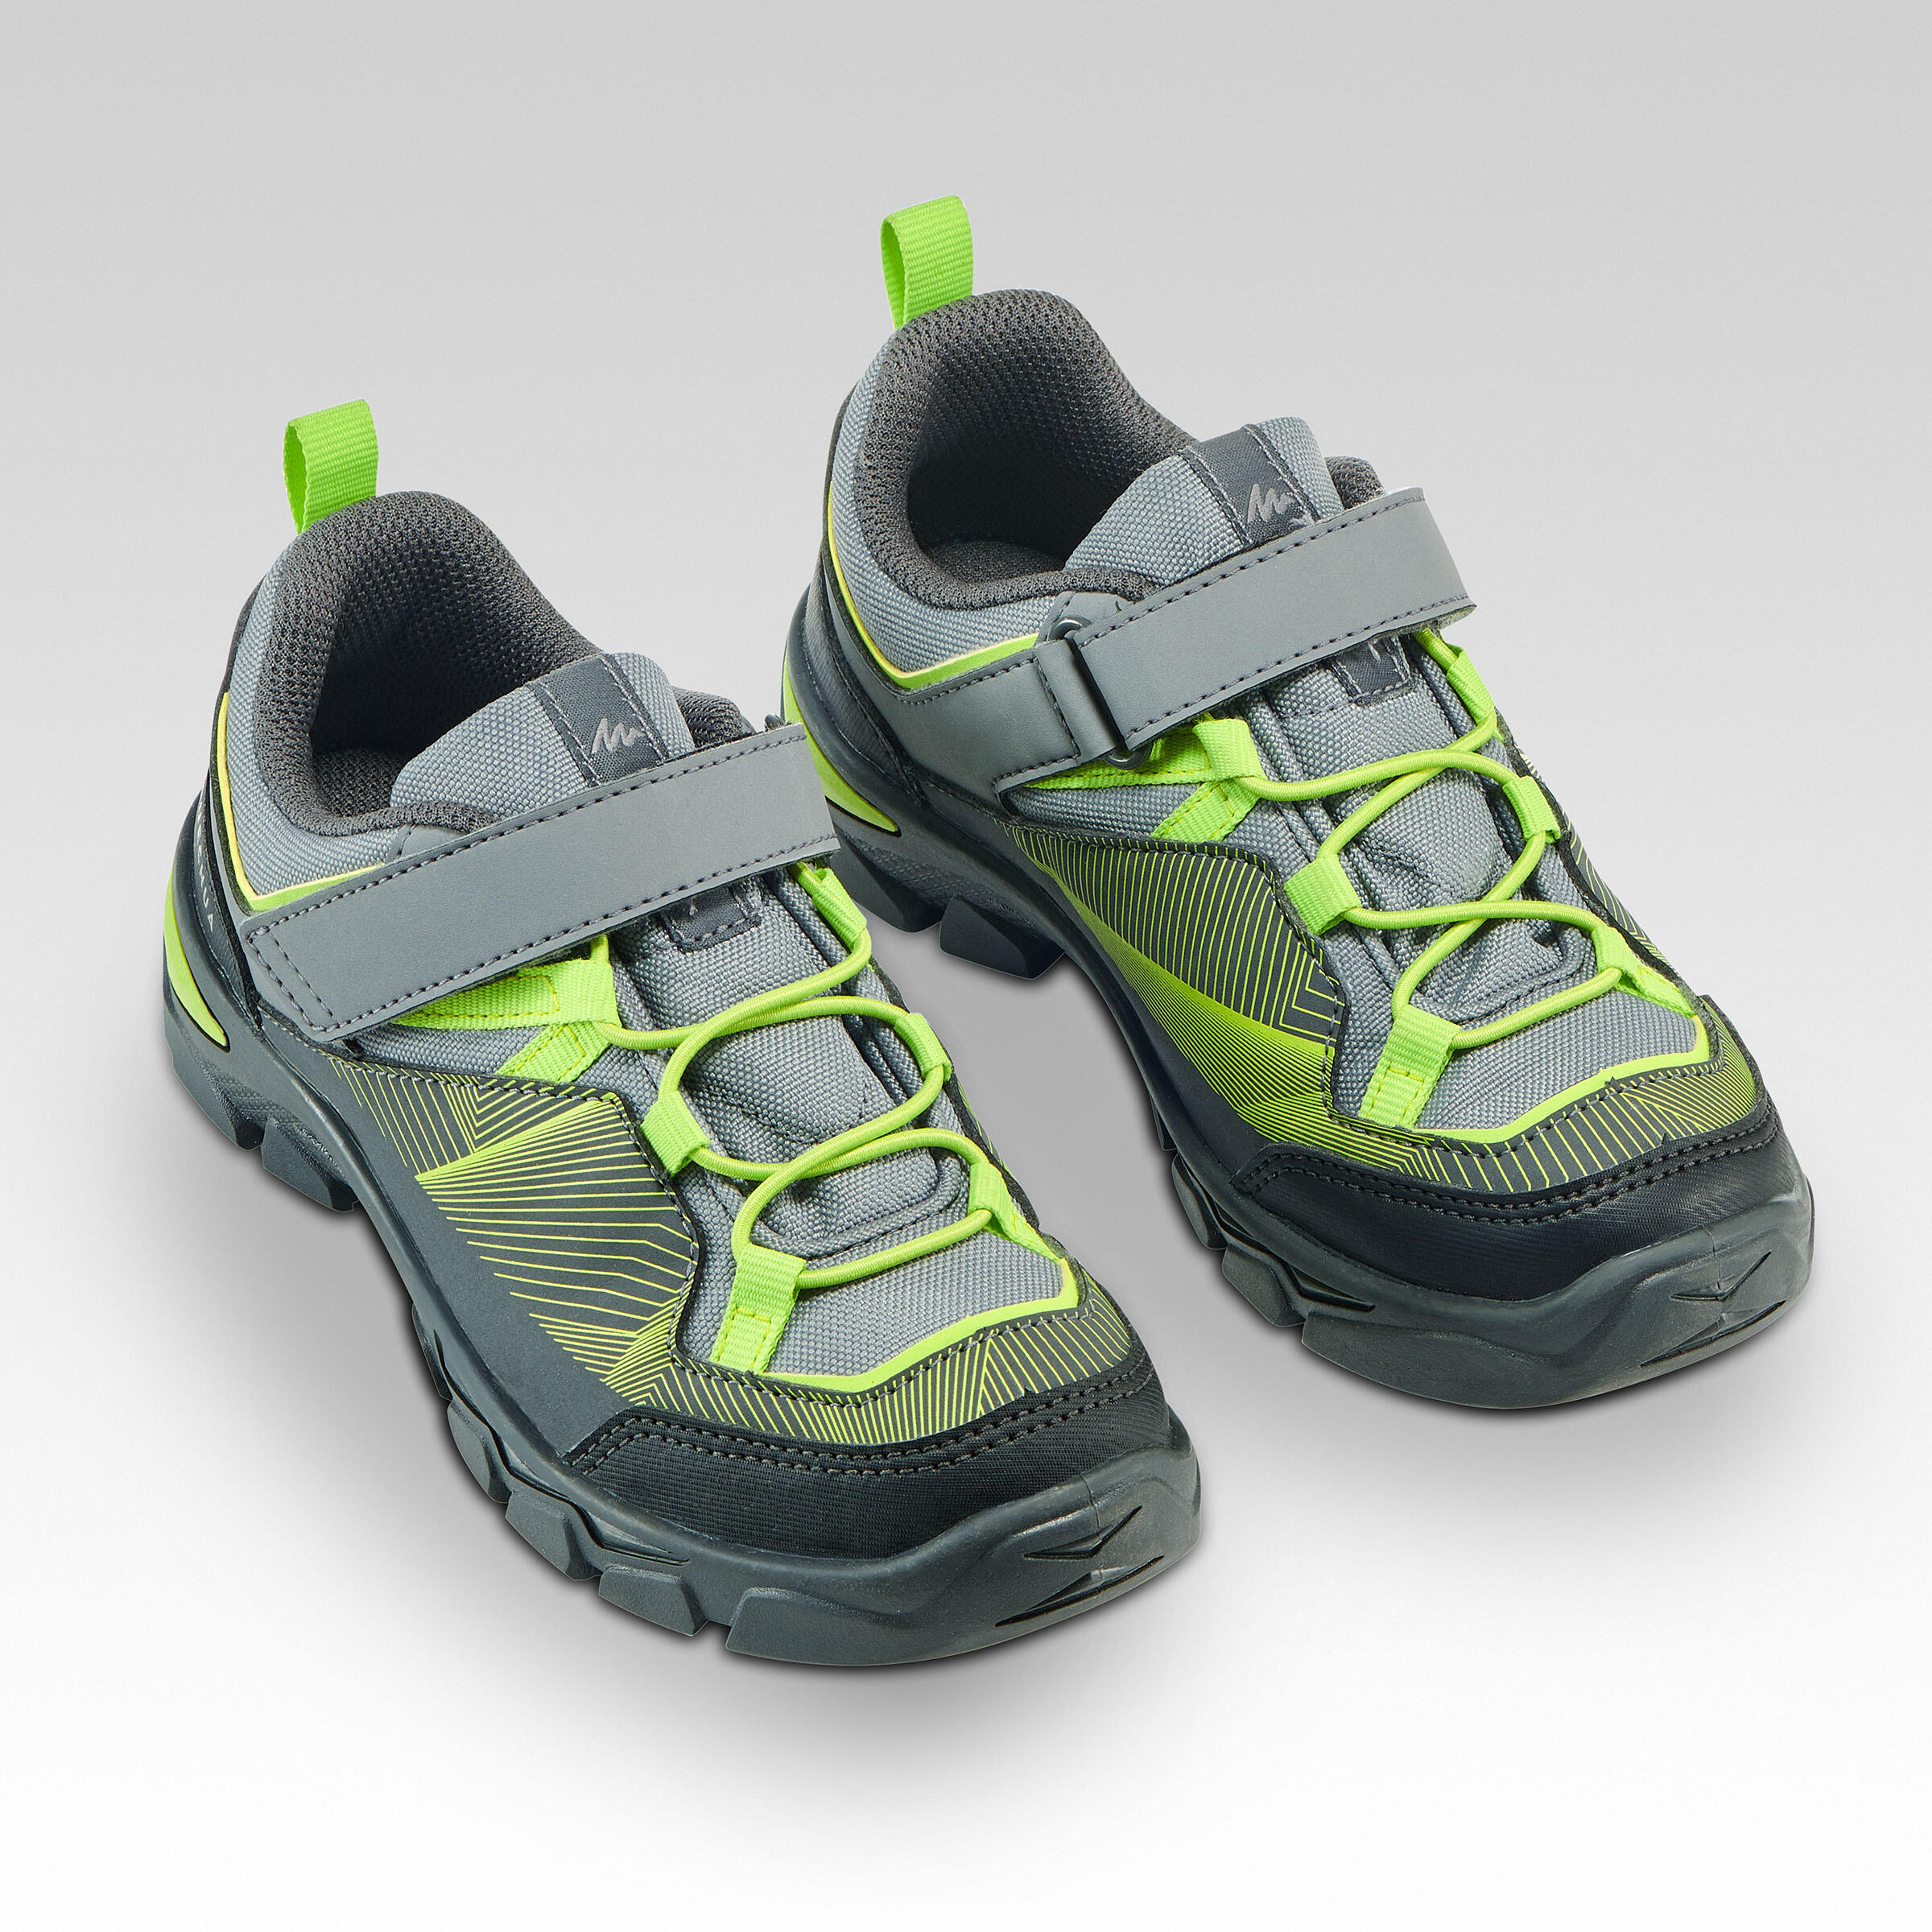 velcro hiking shoes